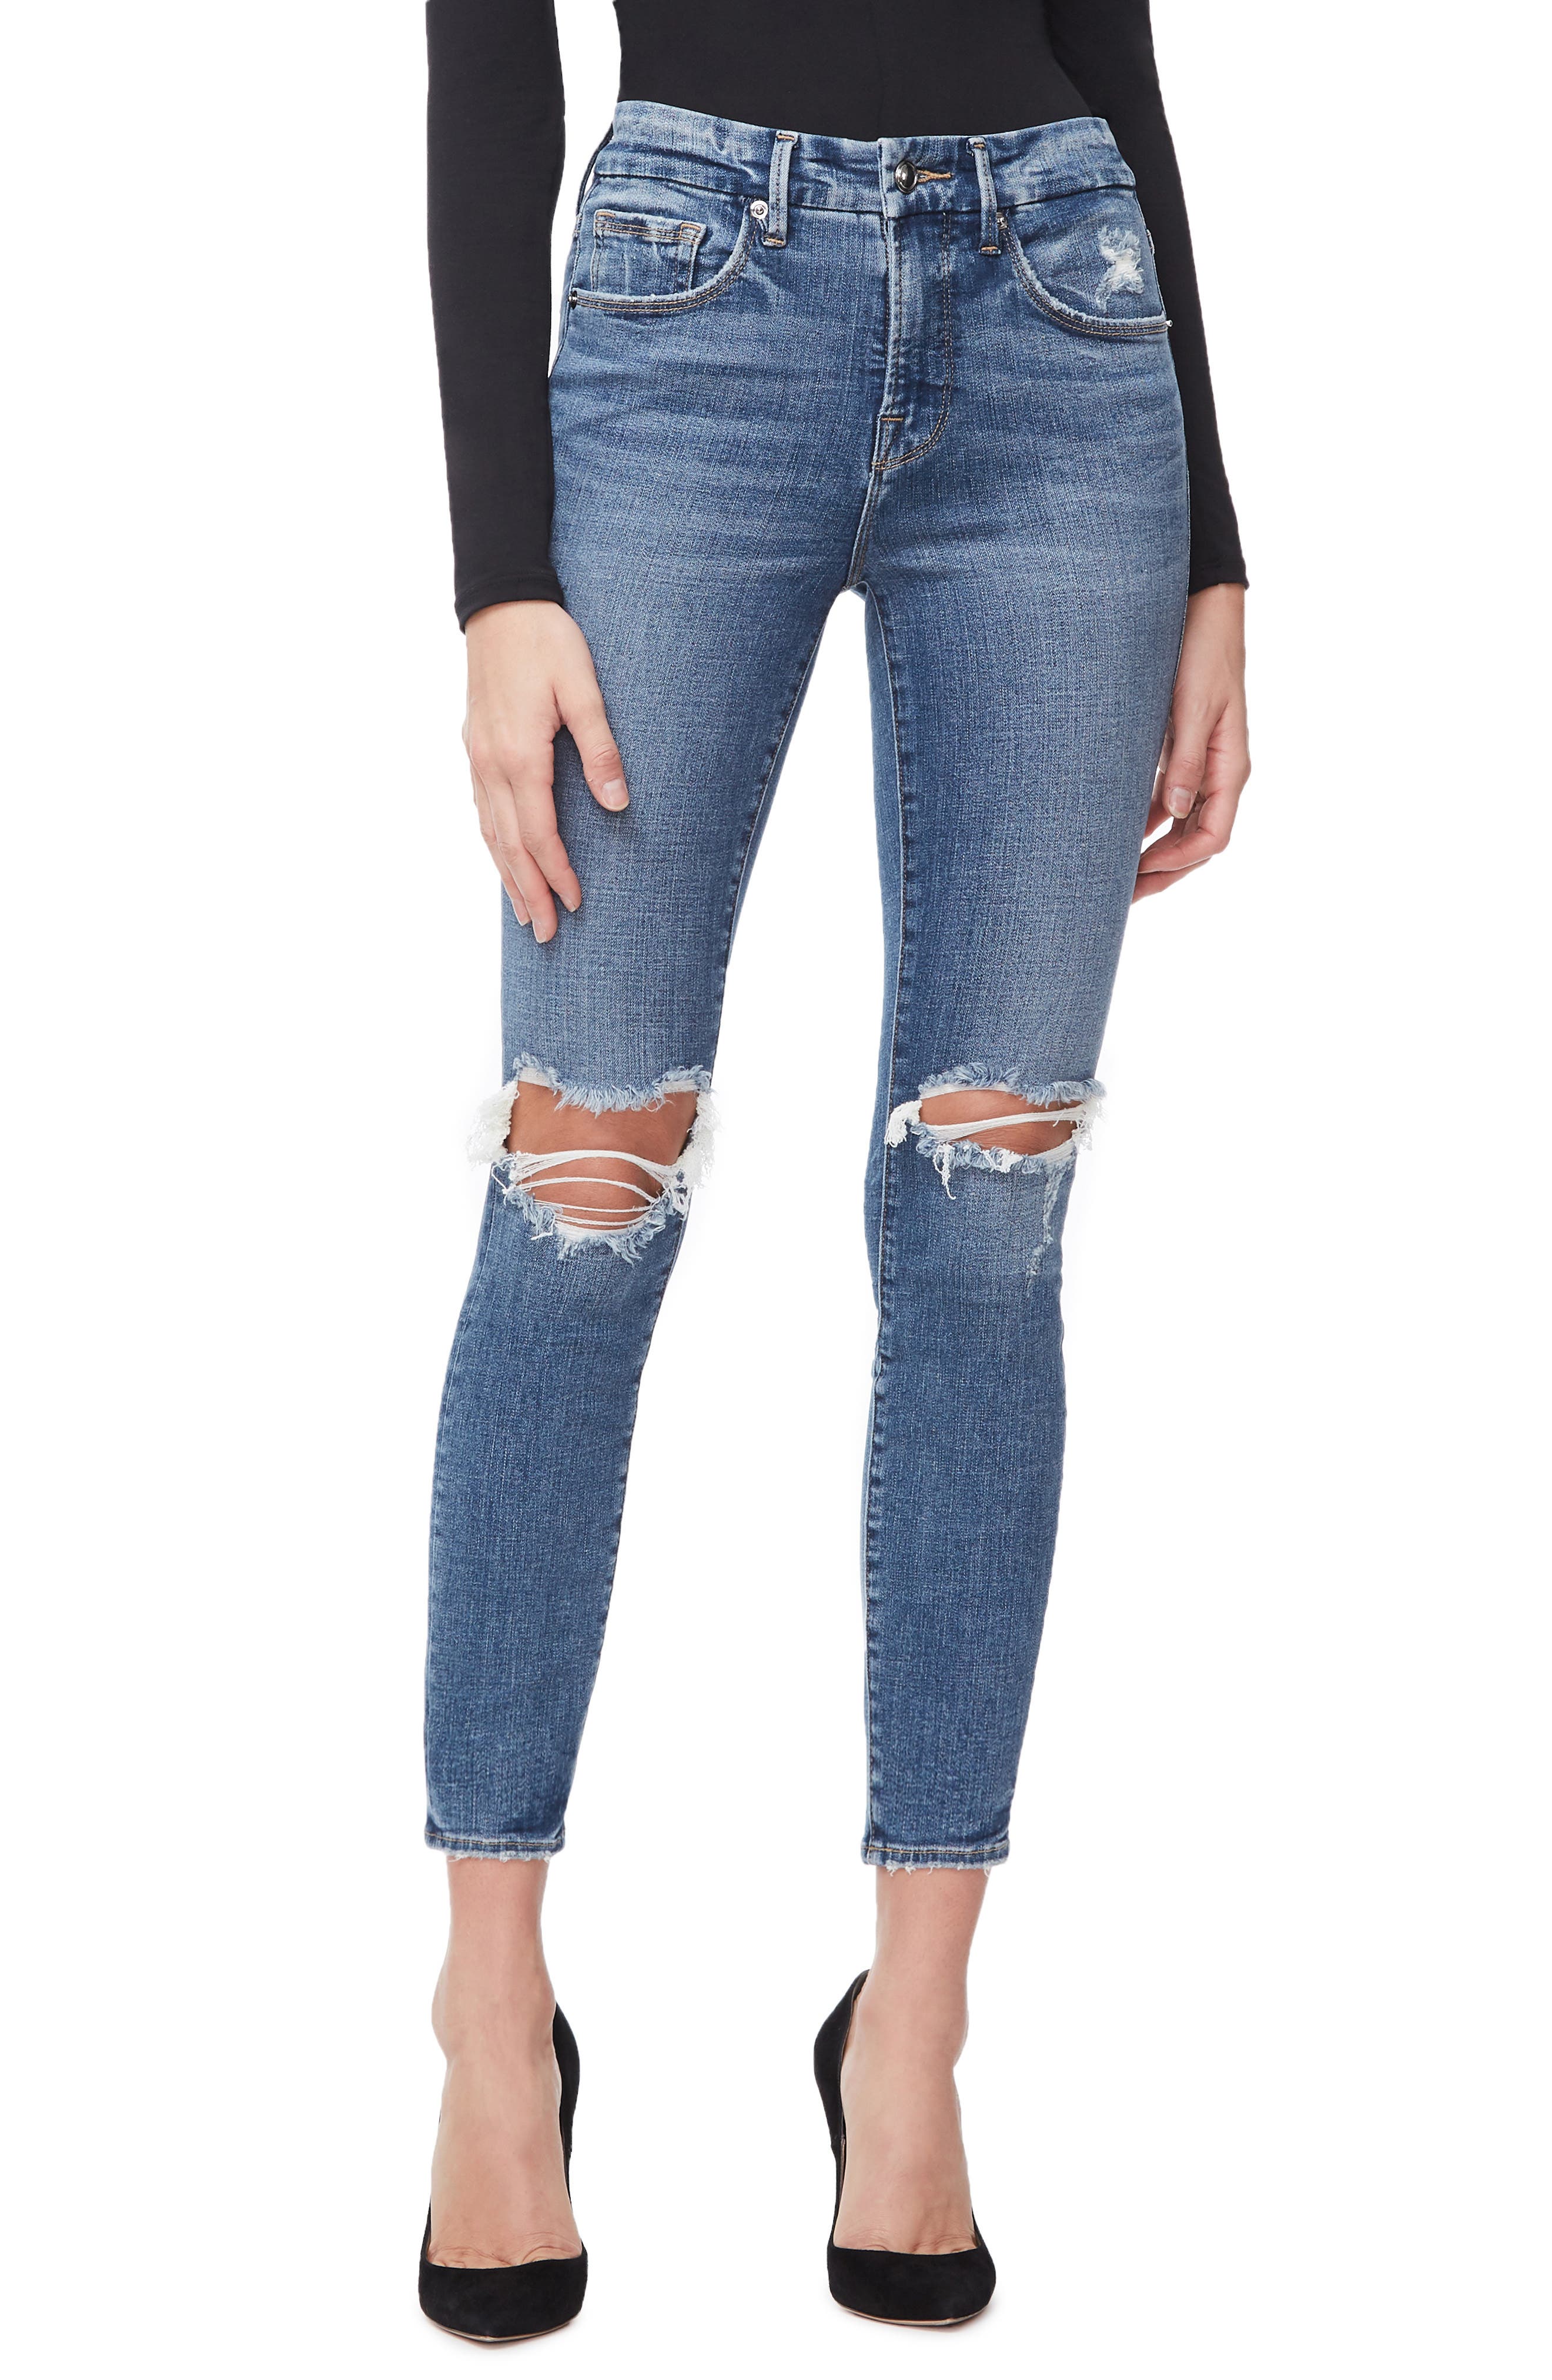 designer ripped jeans womens